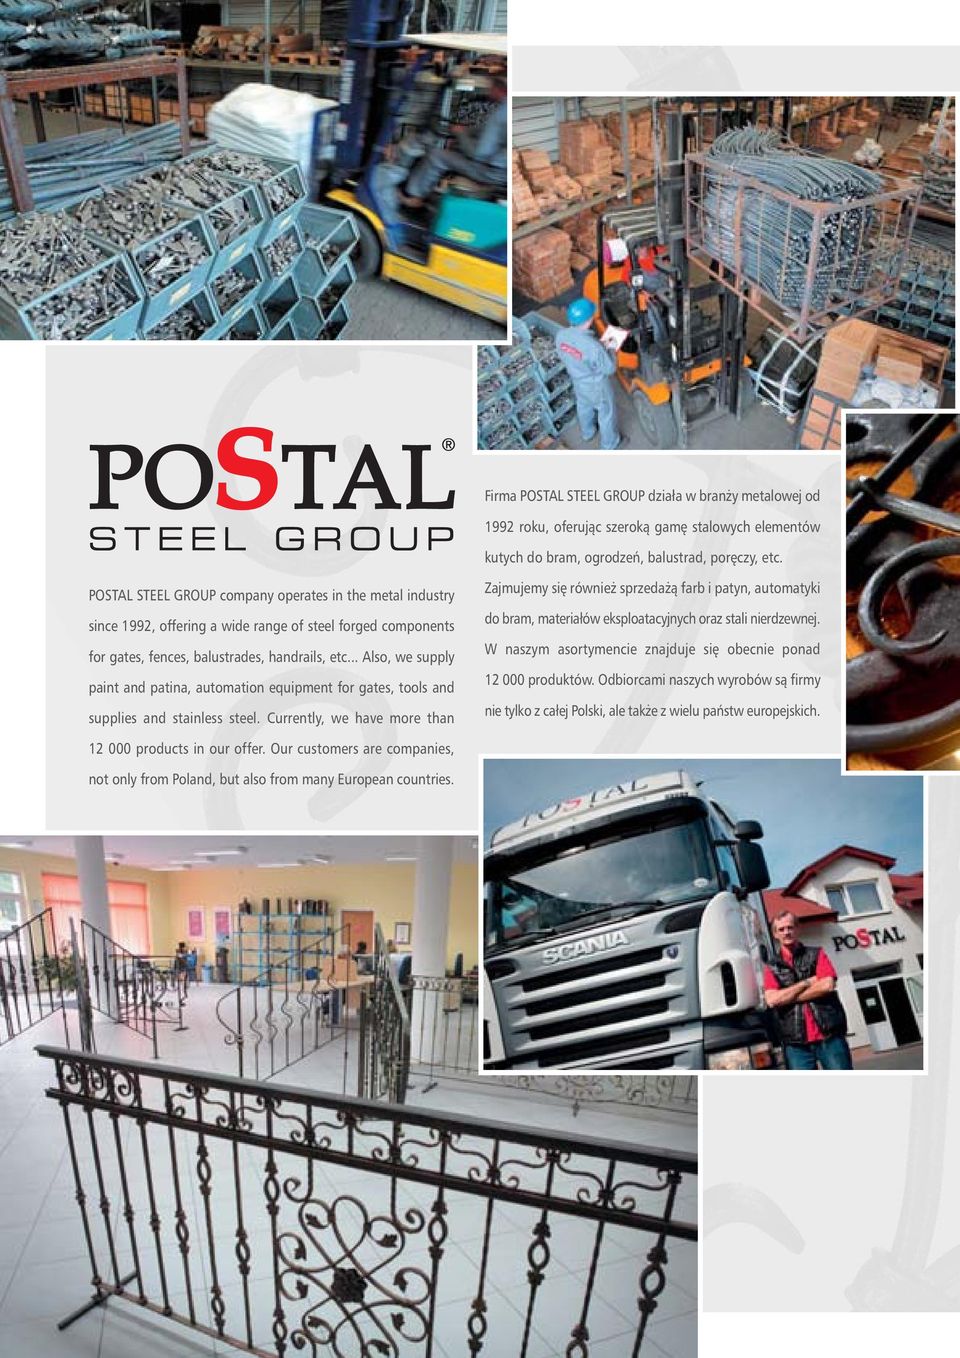 .. Also, we supply paint and patina, automation equipment for gates, tools and supplies and stainless steel.